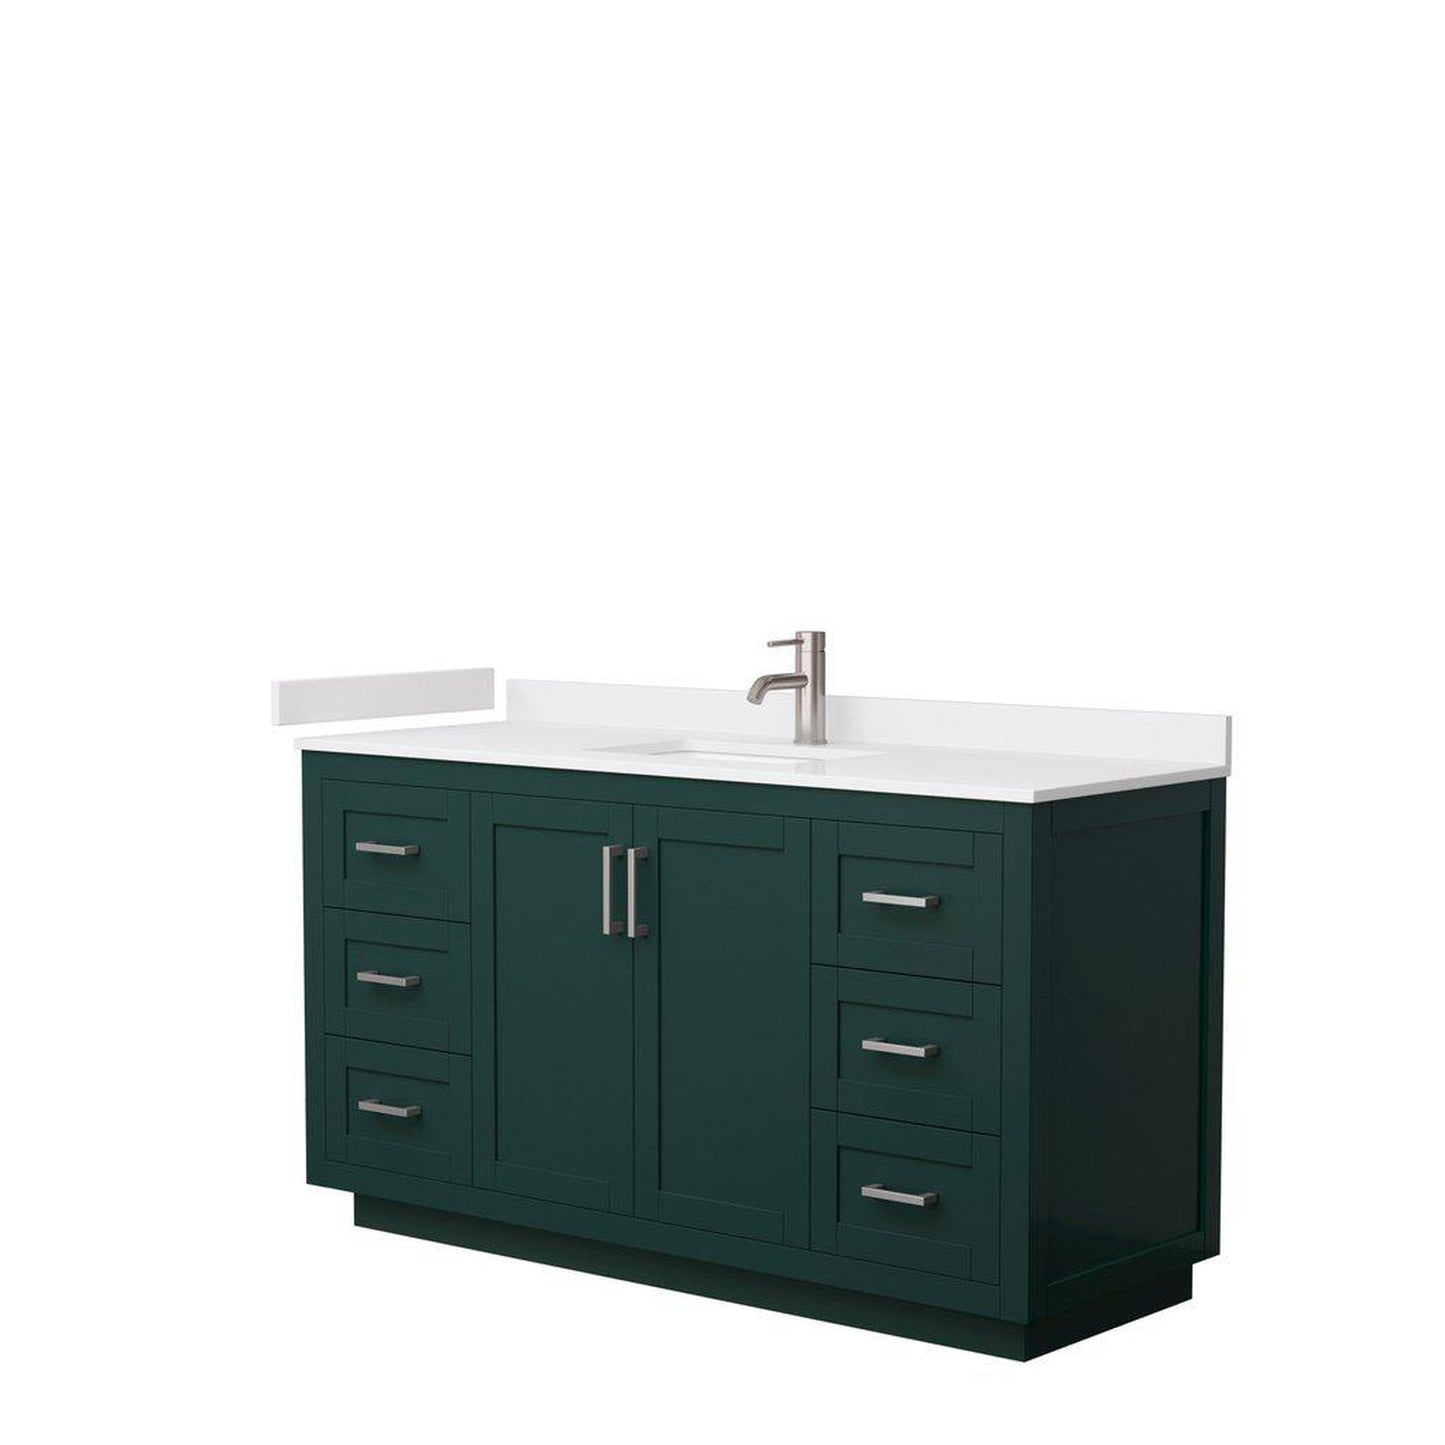 Wyndham Collection Miranda 60" Single Bathroom Green Vanity Set With White Cultured Marble Countertop, Undermount Square Sink, And Brushed Nickel Trim